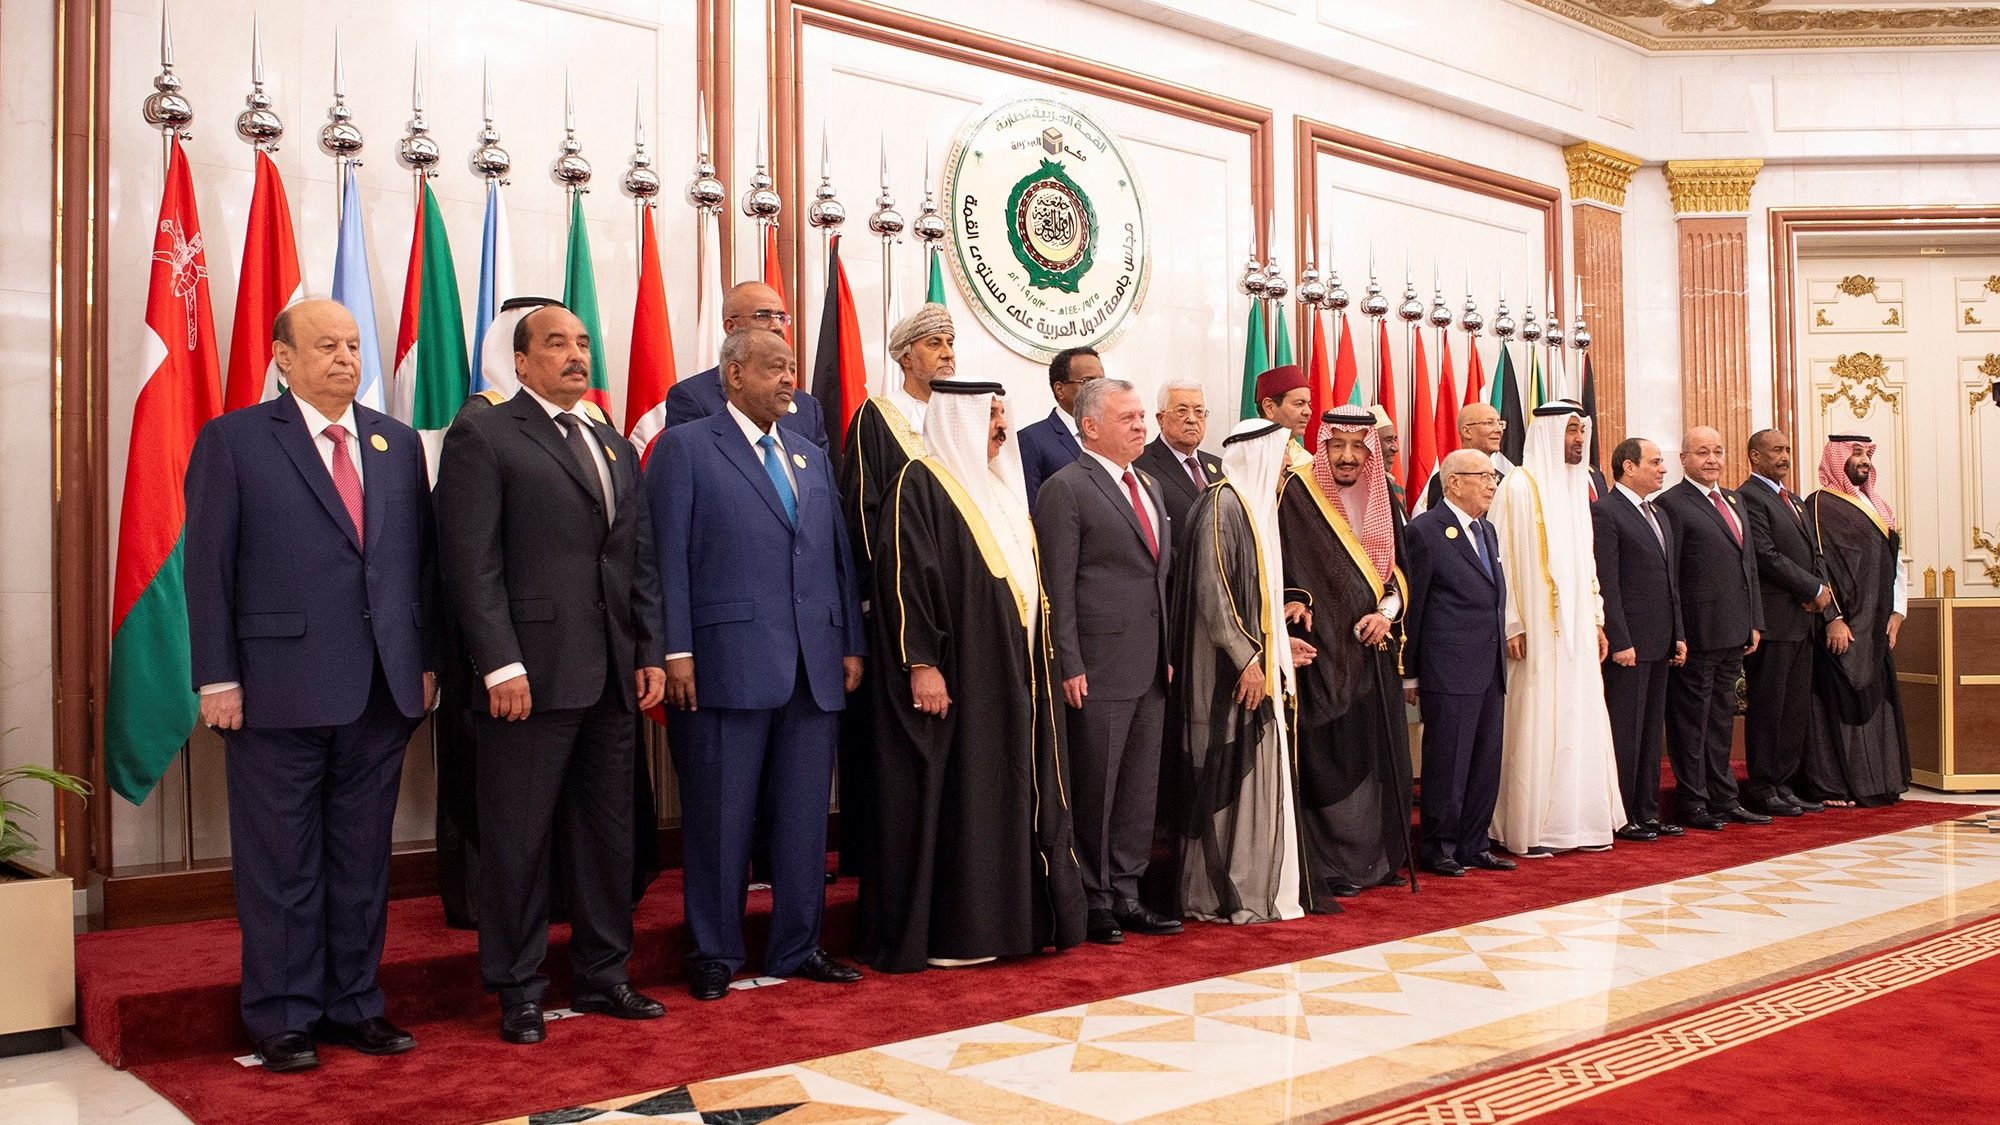 The Mecca Summit and the Security of the Region